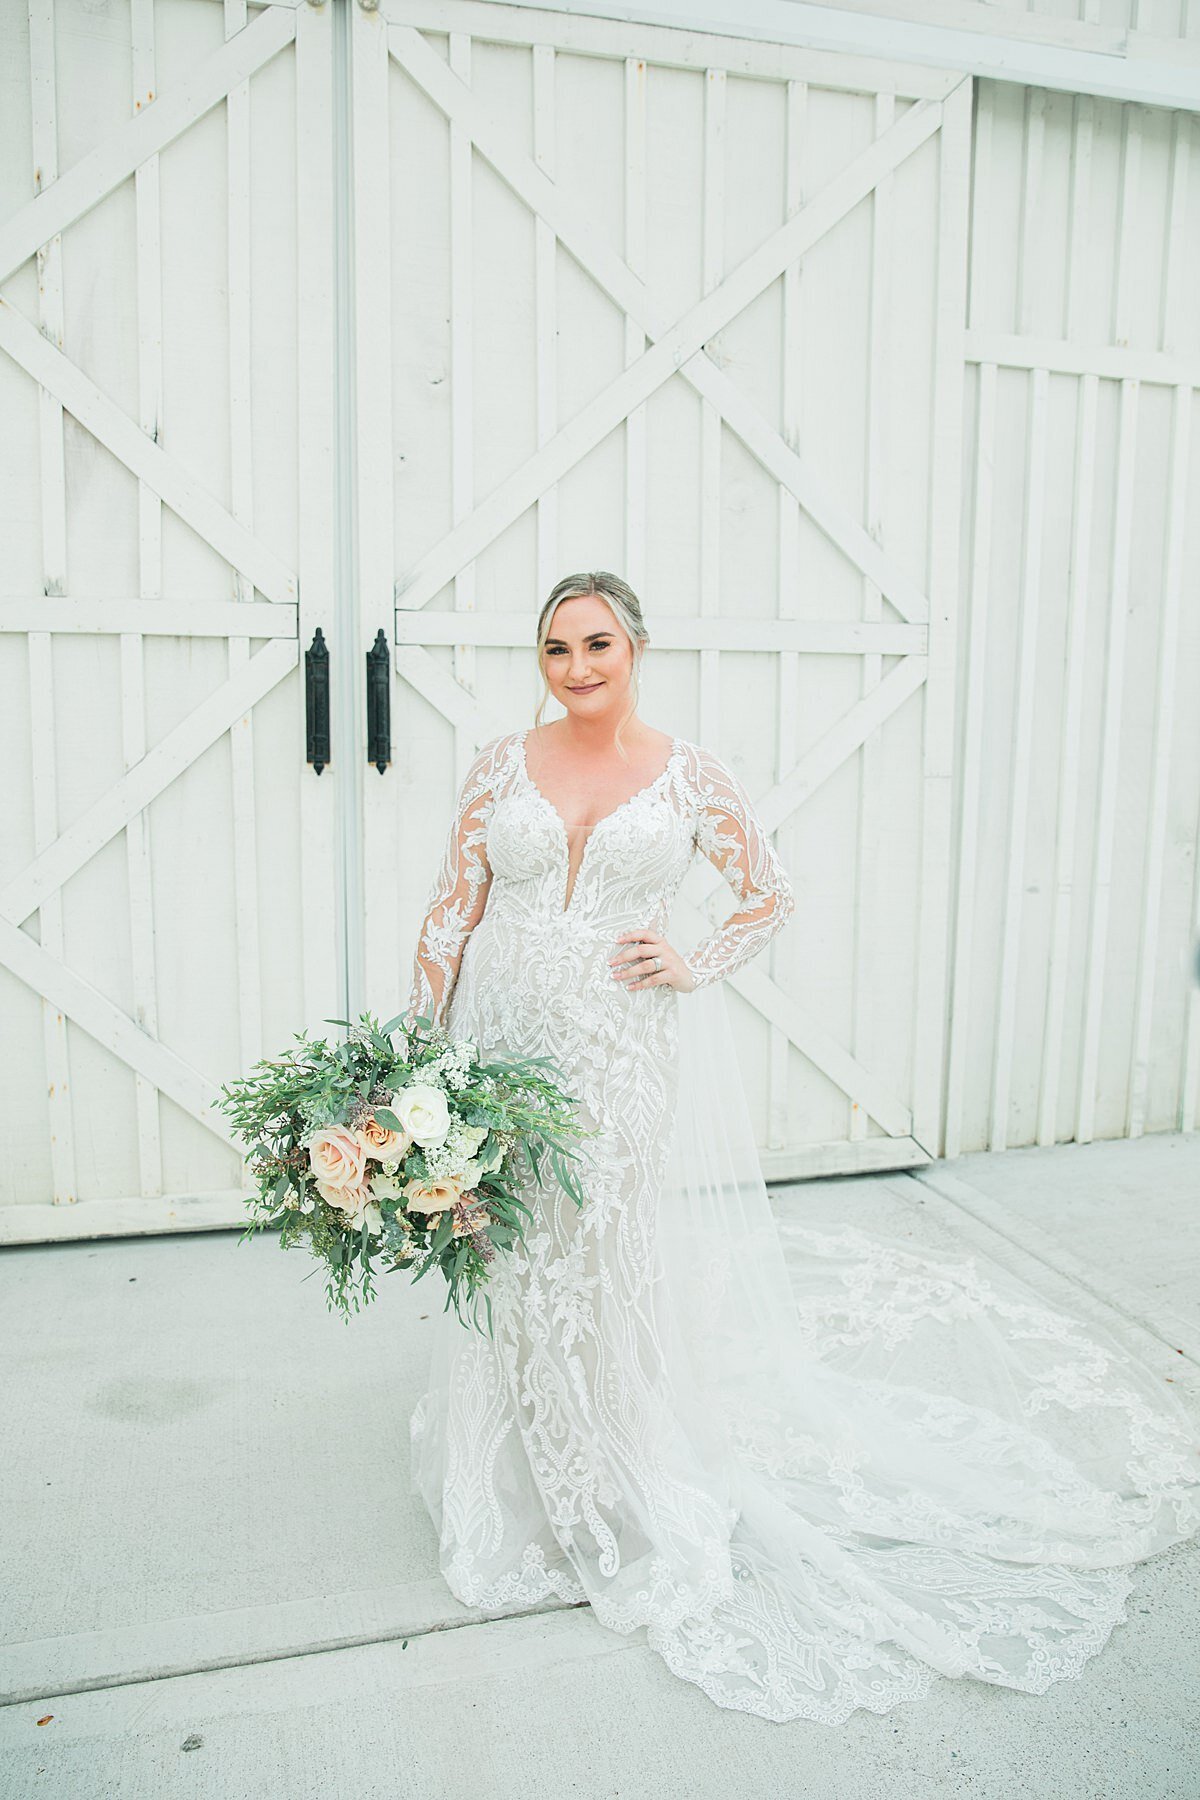 Bride in long sleeve lace dress with lush bouquet